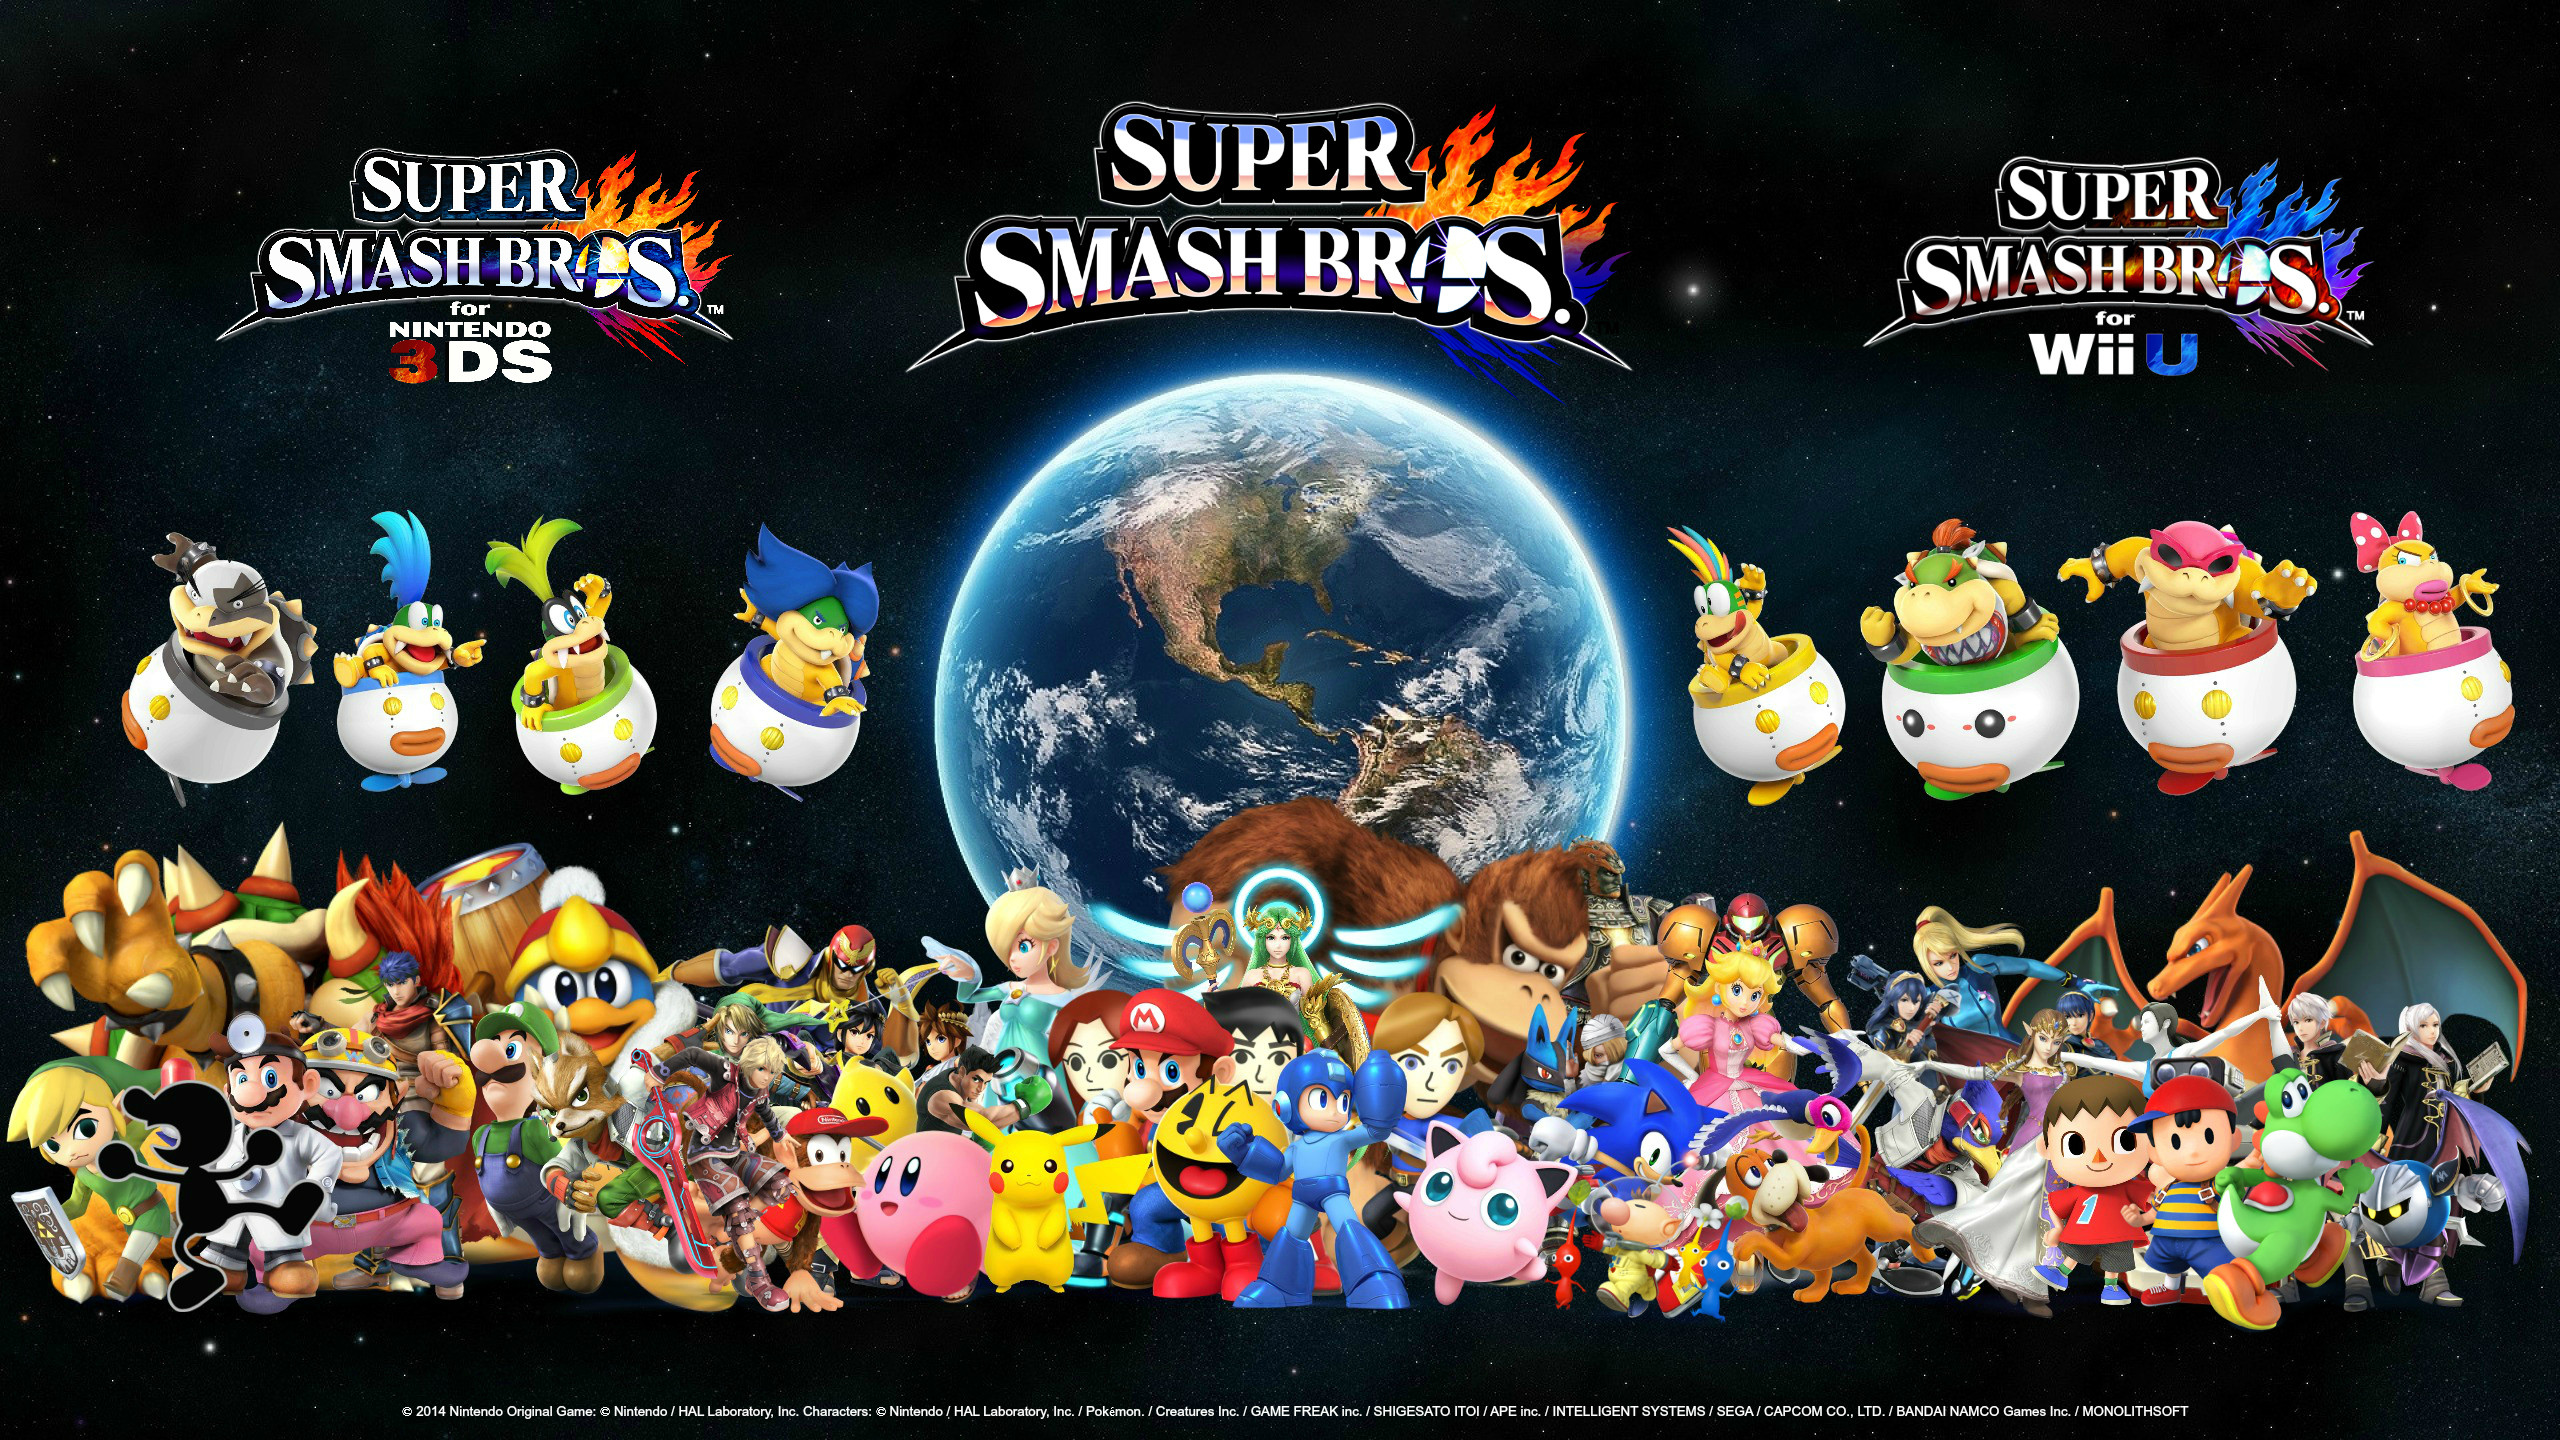 2560x1440 ... My Wallpaper from Super Smash Bros. 3DS/Wii U by AngelChavez98